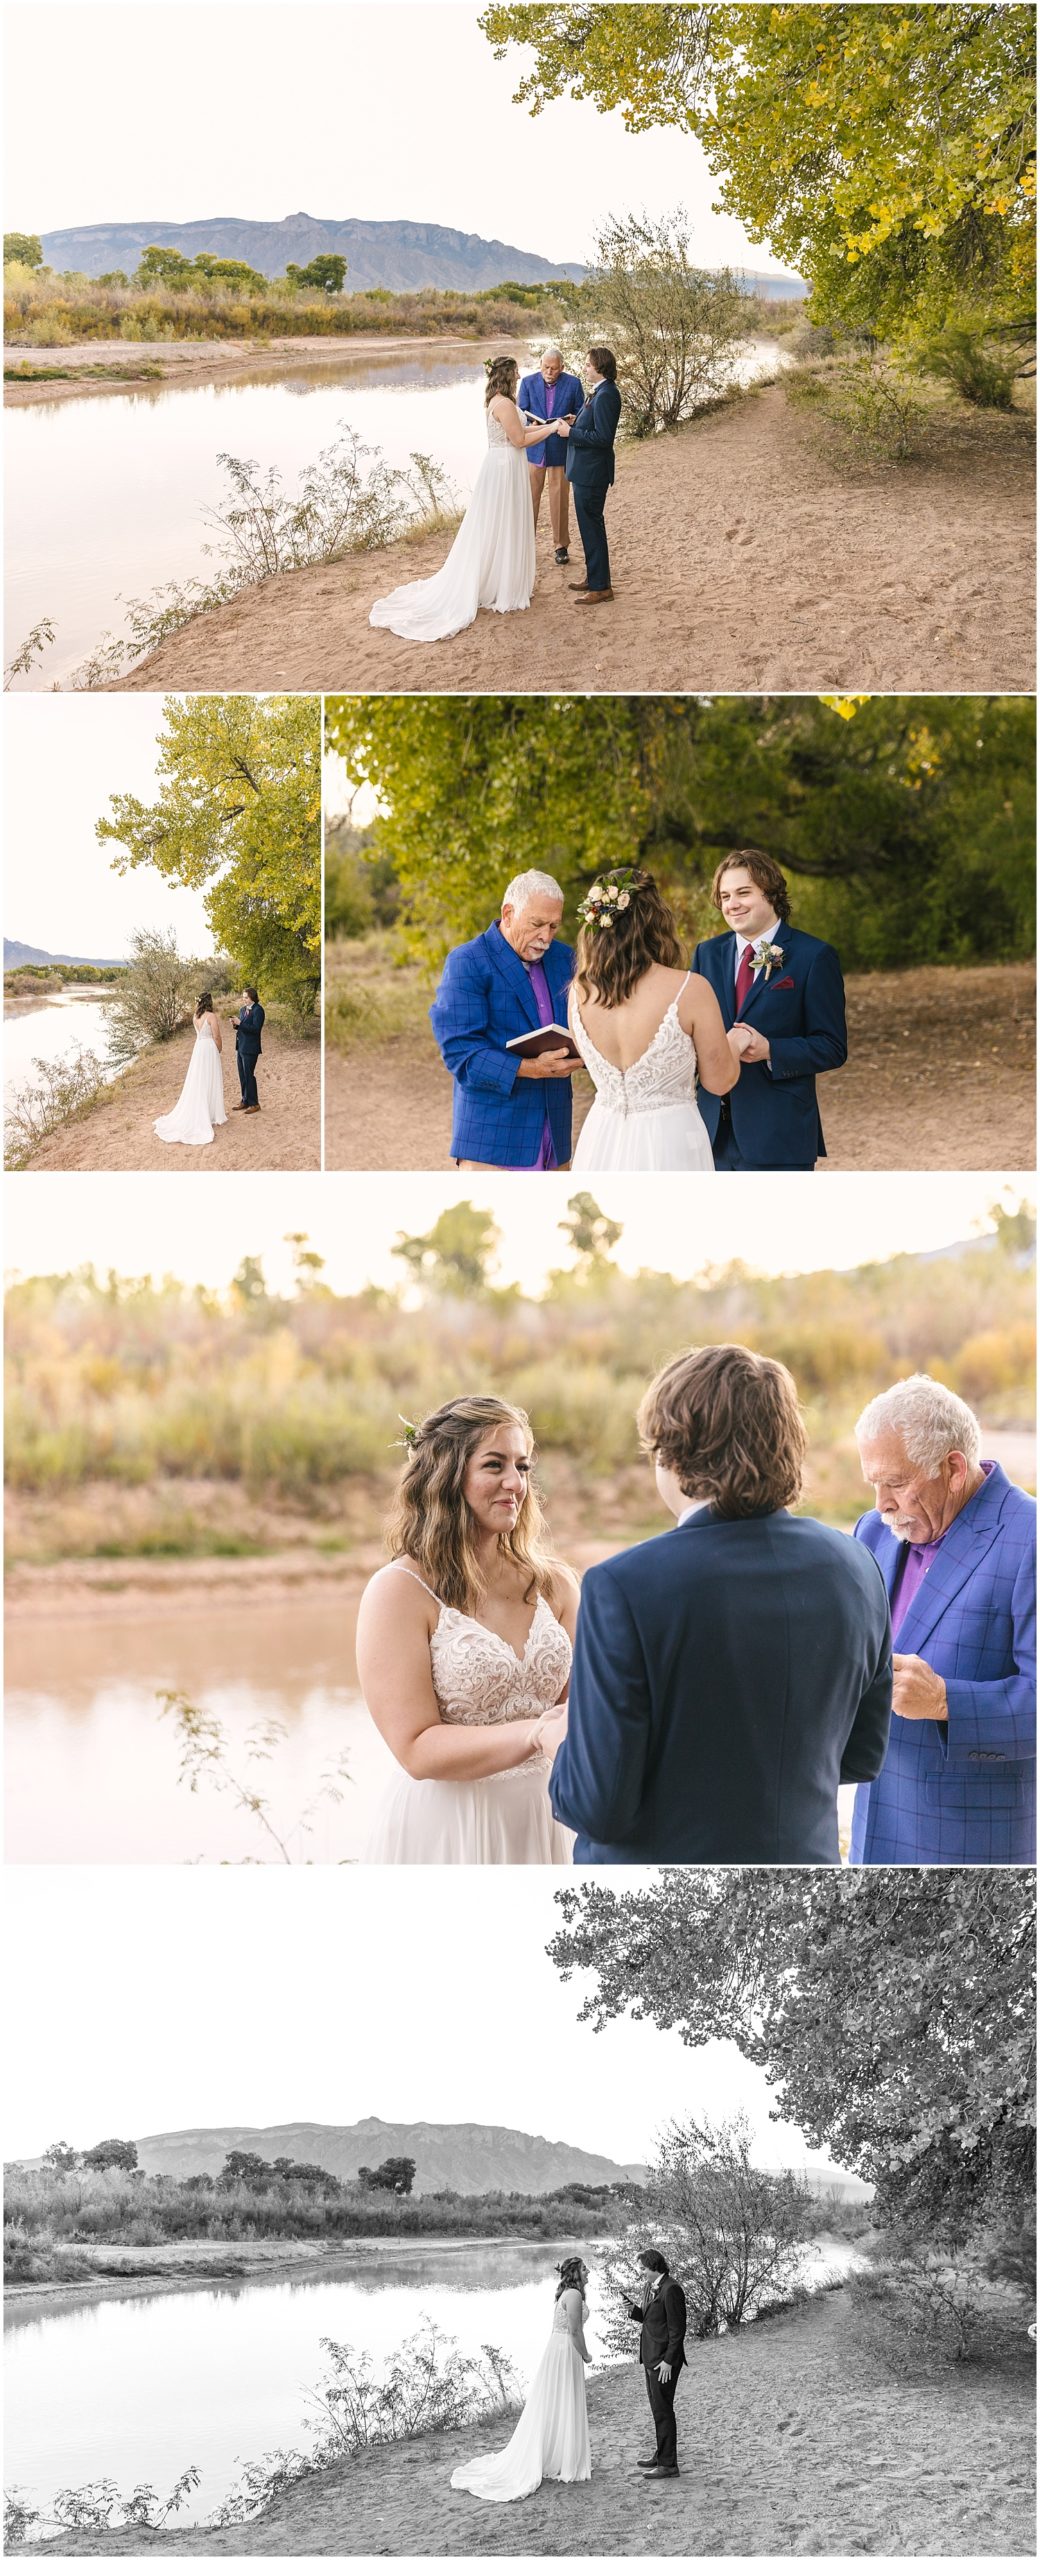 Elopement ceremony by the Rio Grande in Corrales New Mexico